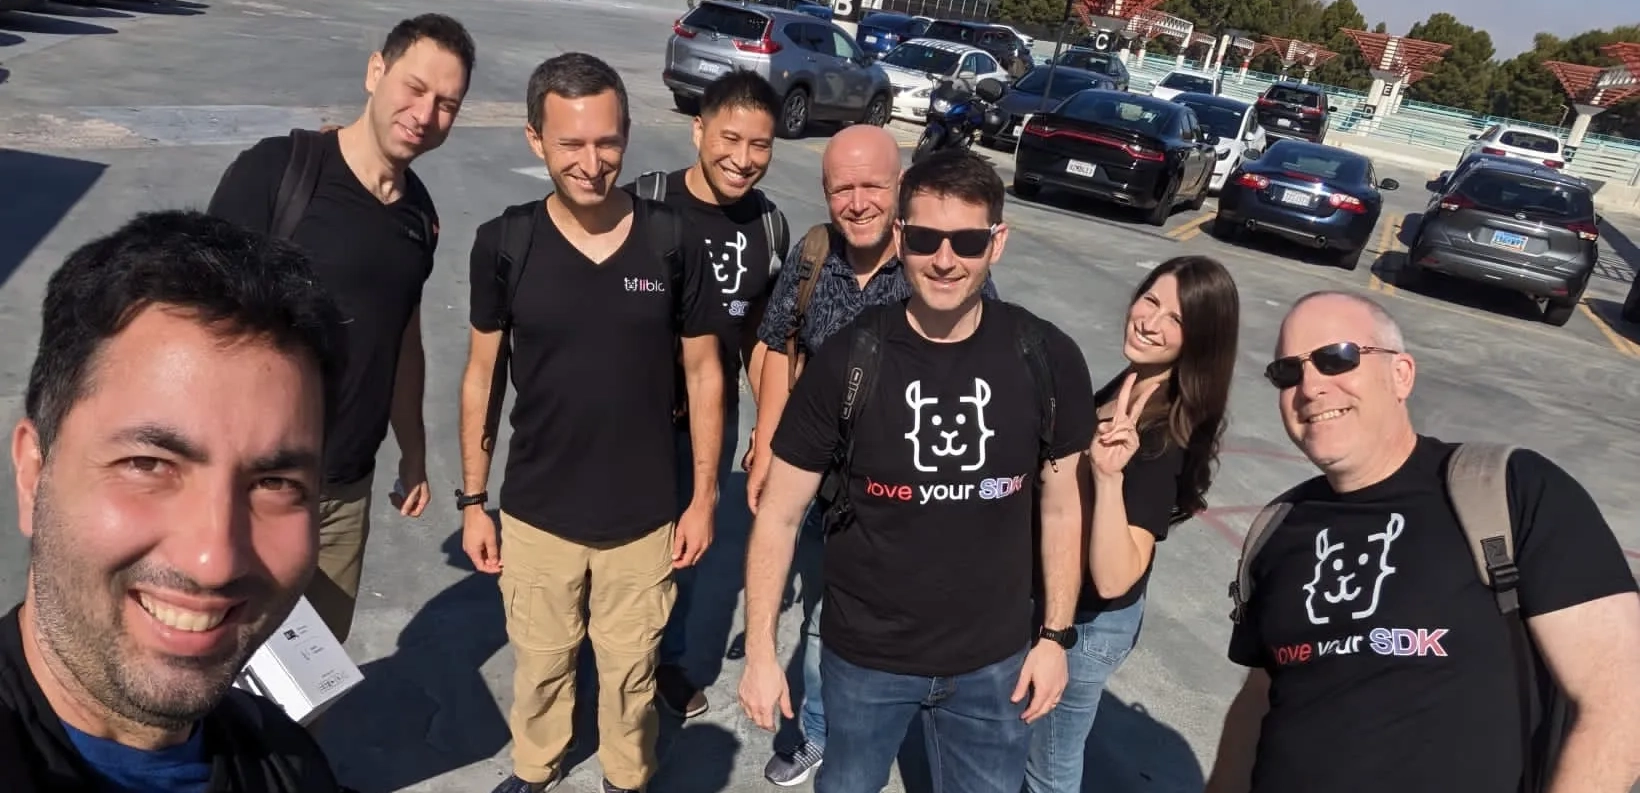 A group of people posing for a selfie wearing liblab shirts standing in a carpark. 2 of the team are wearing sunglasses, and another is making a peace sign